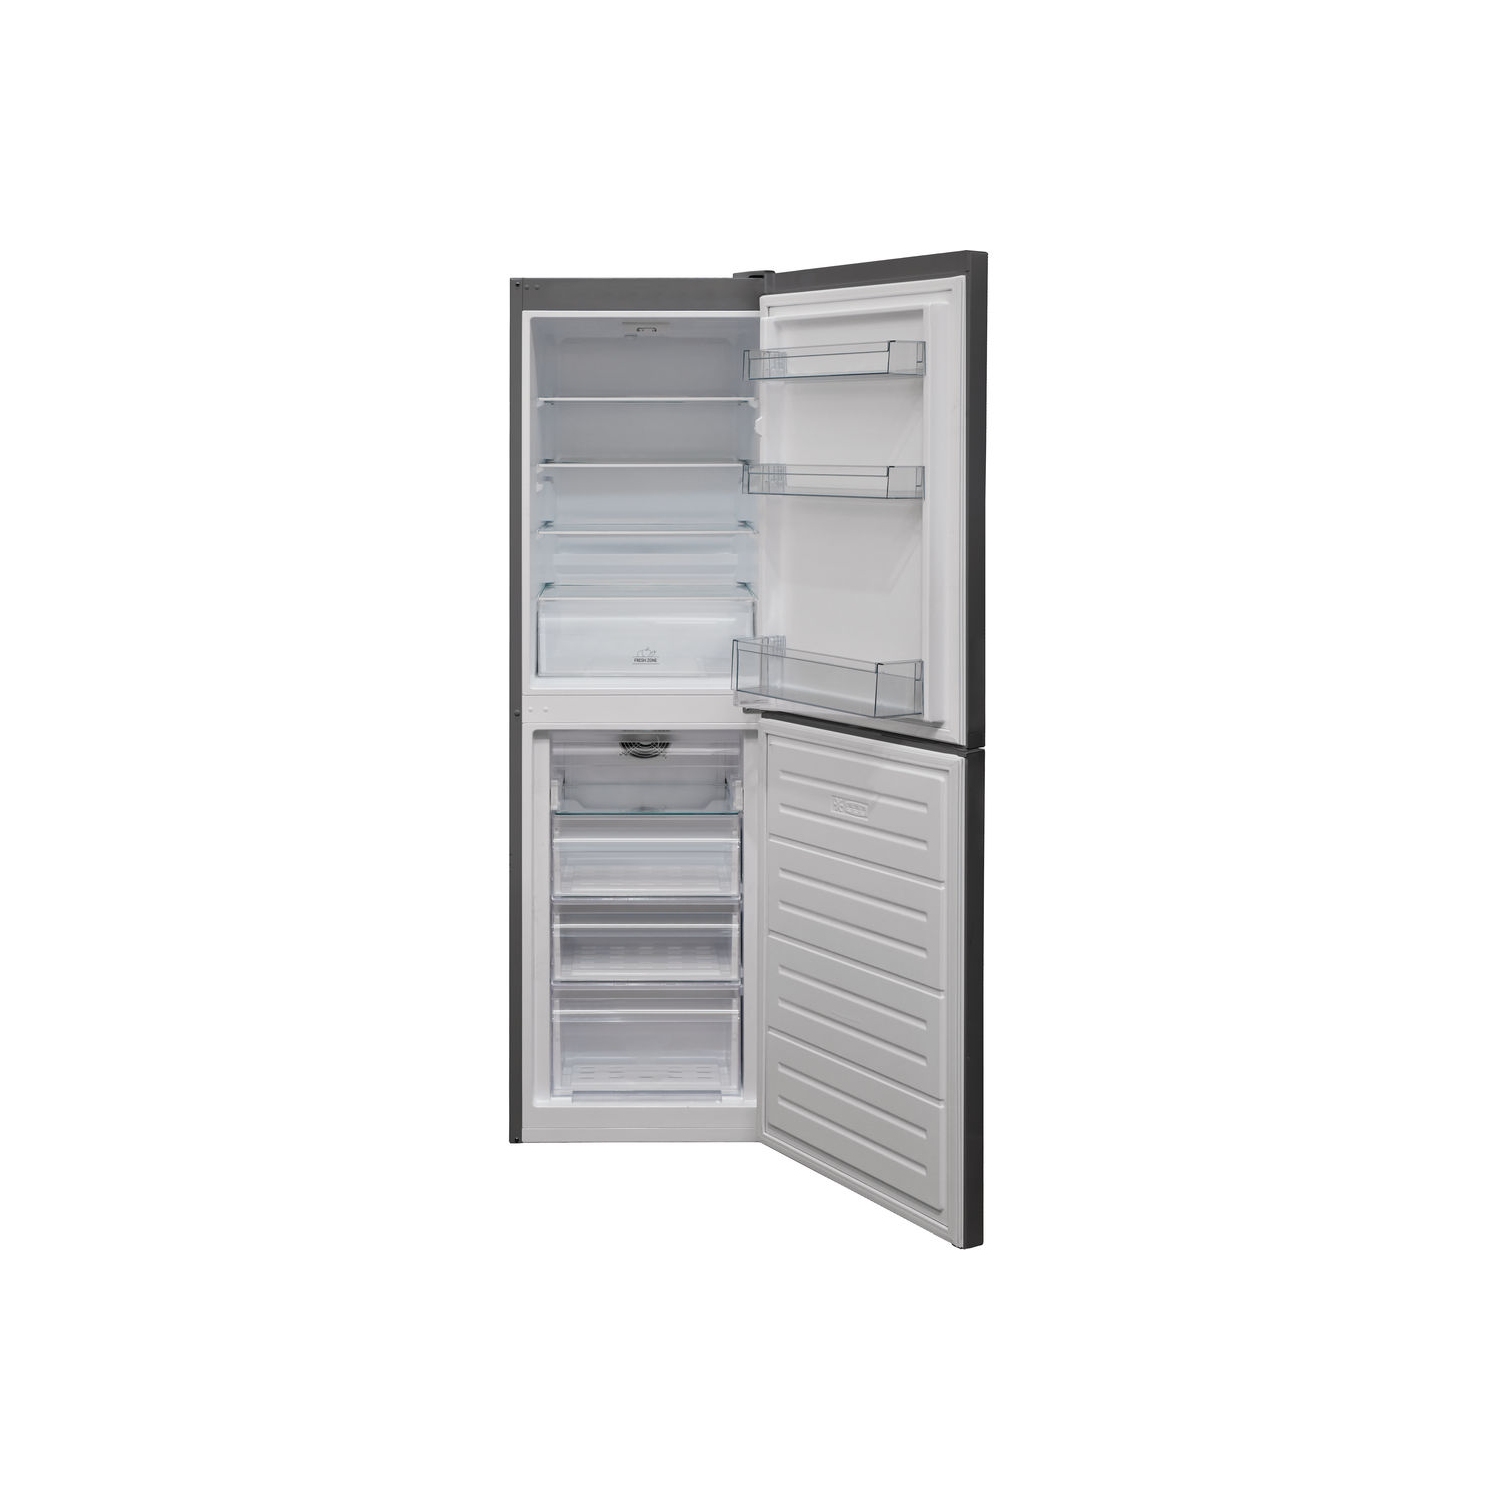 Hotpoint HBNF55181SUK 50/50 Frost Free Fridge Freezer - Silver - A+ Rated - 1